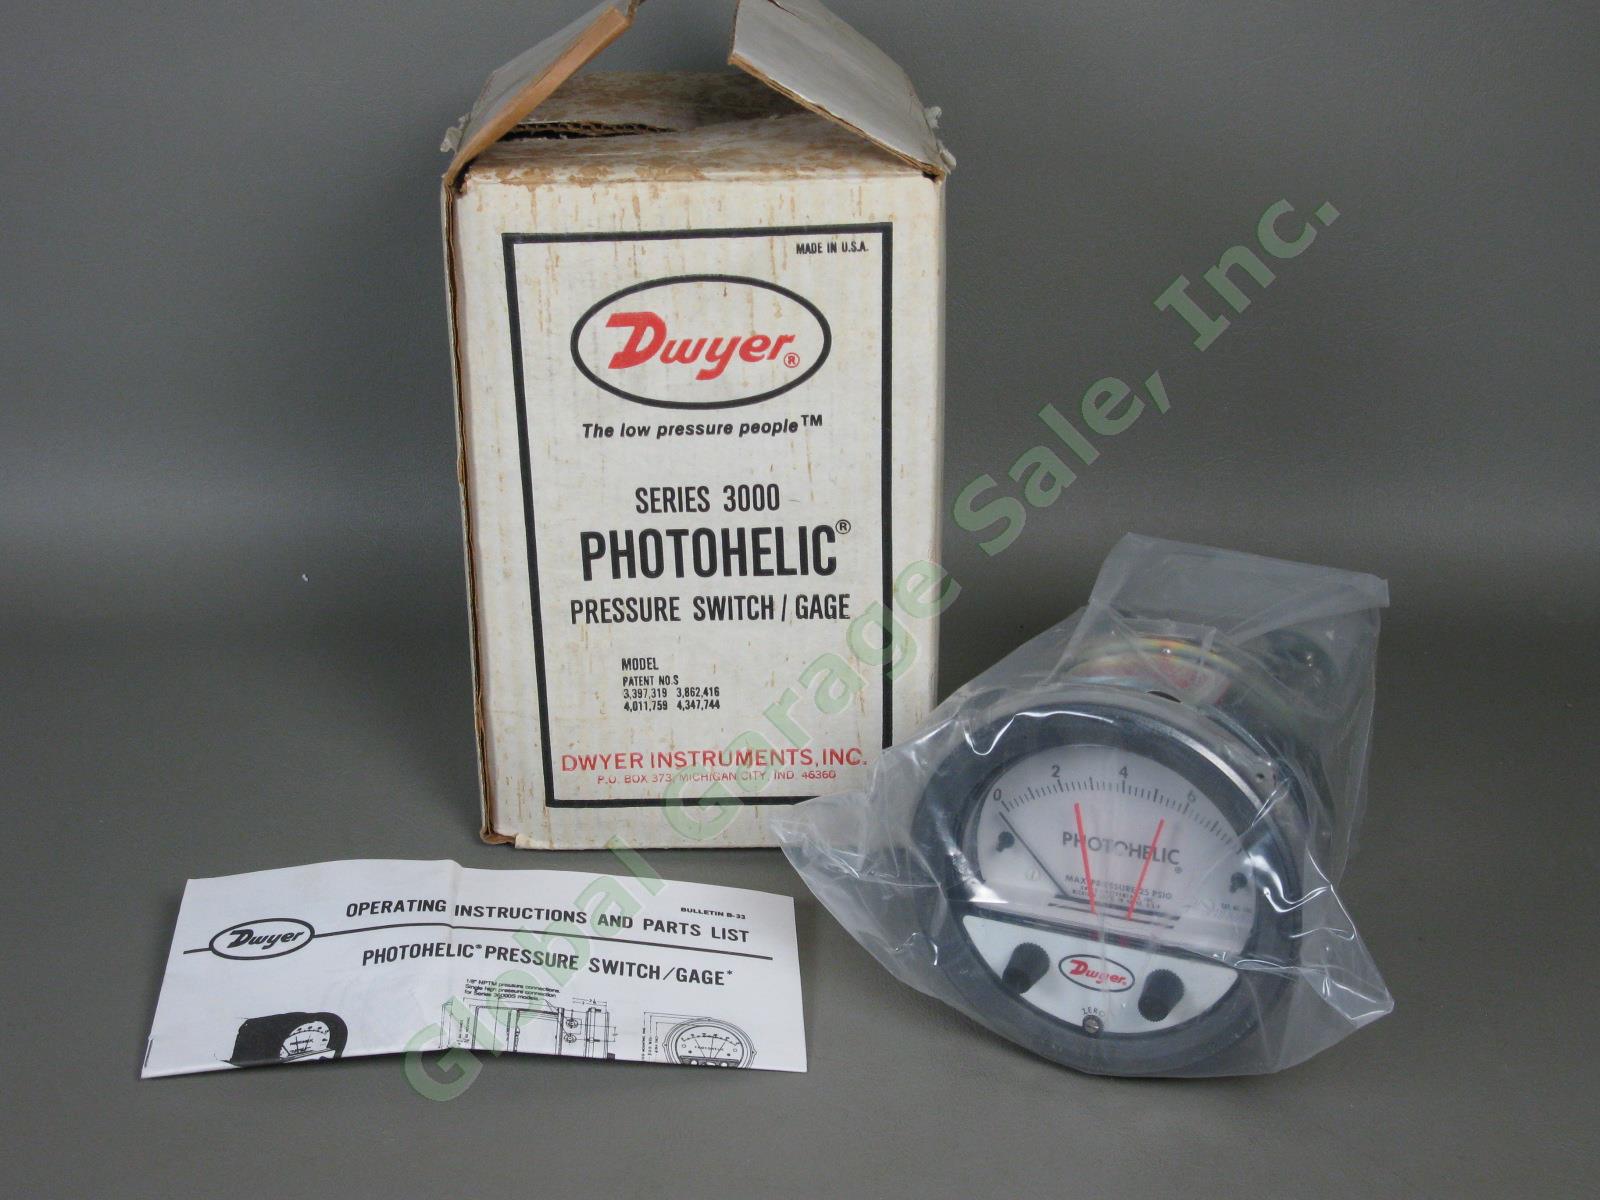 NEW Dwyer Photohelic Series 3000 3008 Pressure Switch Gage 25 PSIG 0-8" Water NR